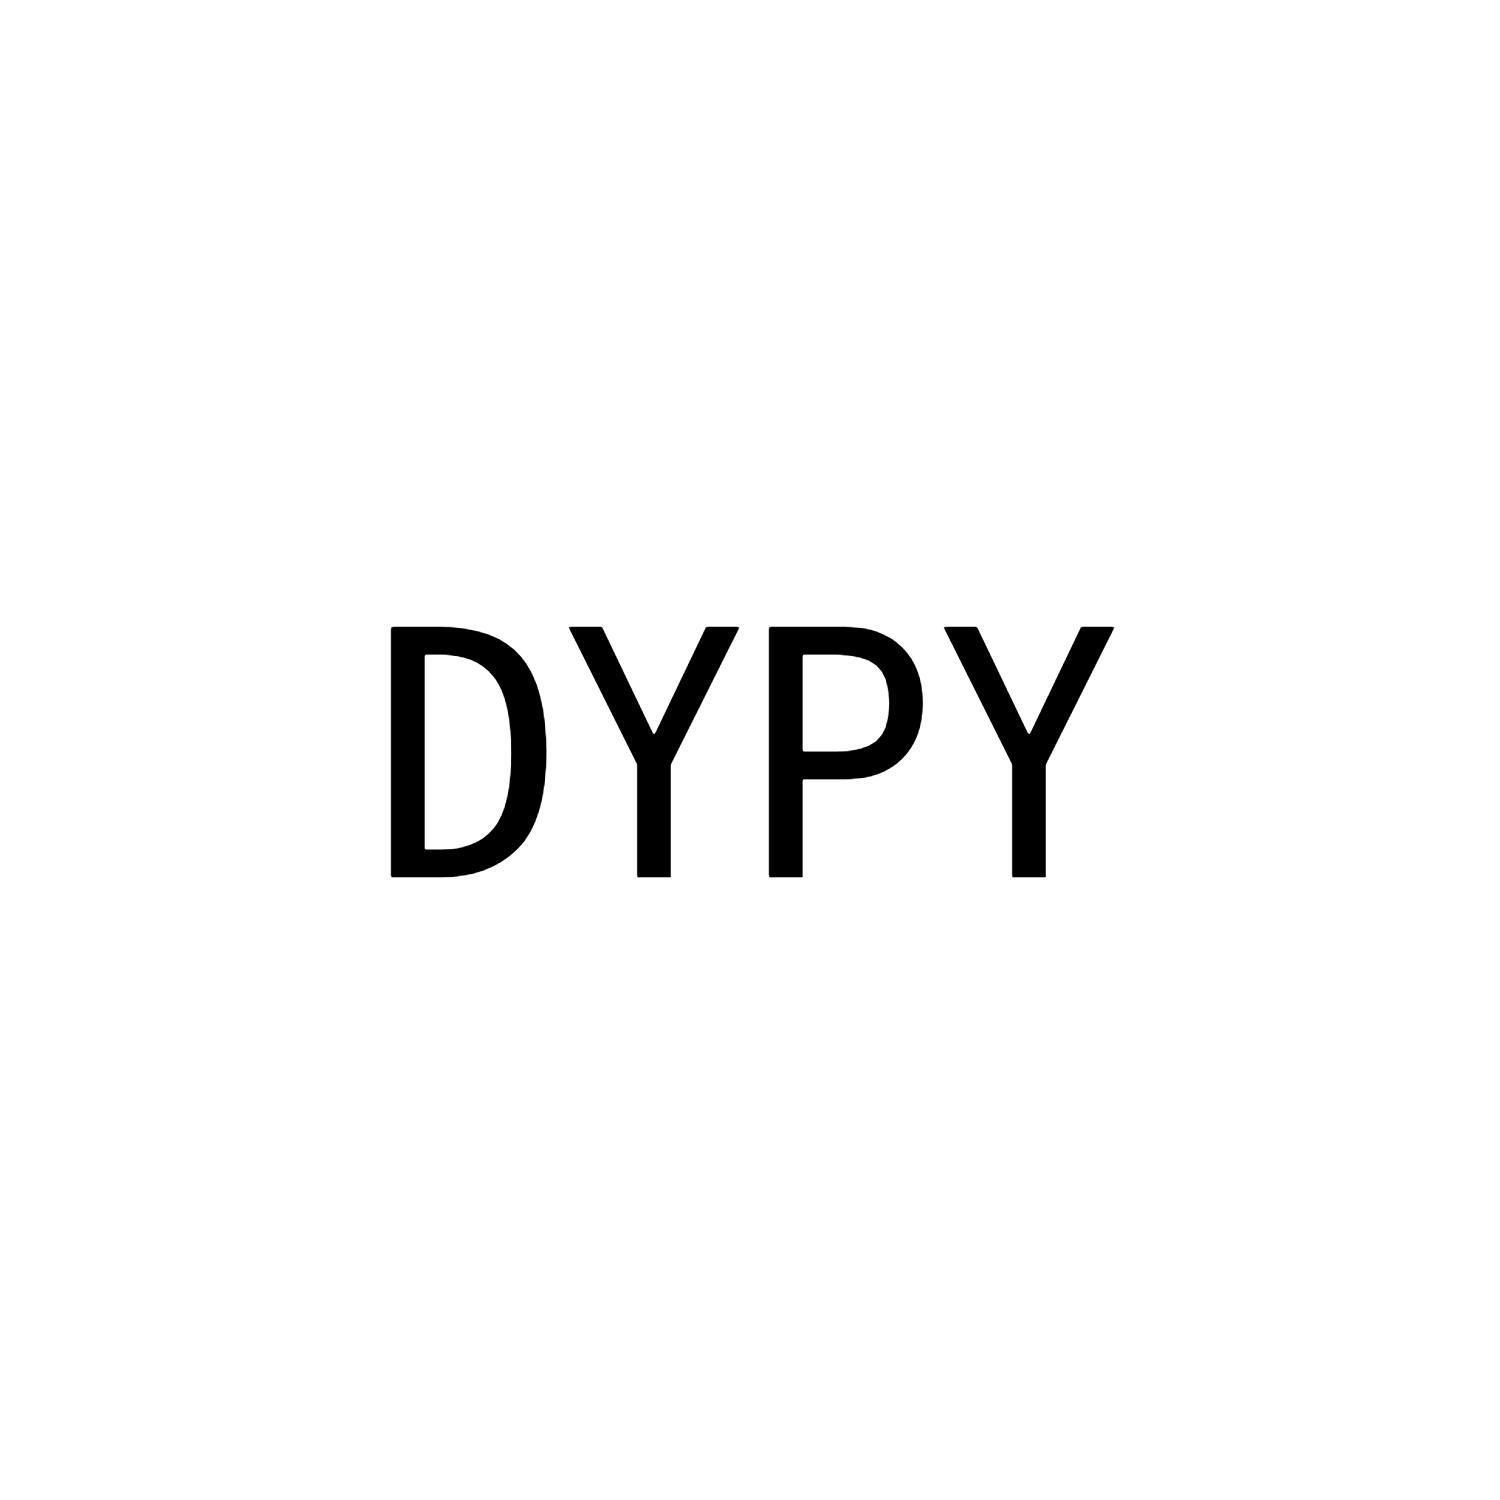 DYPY